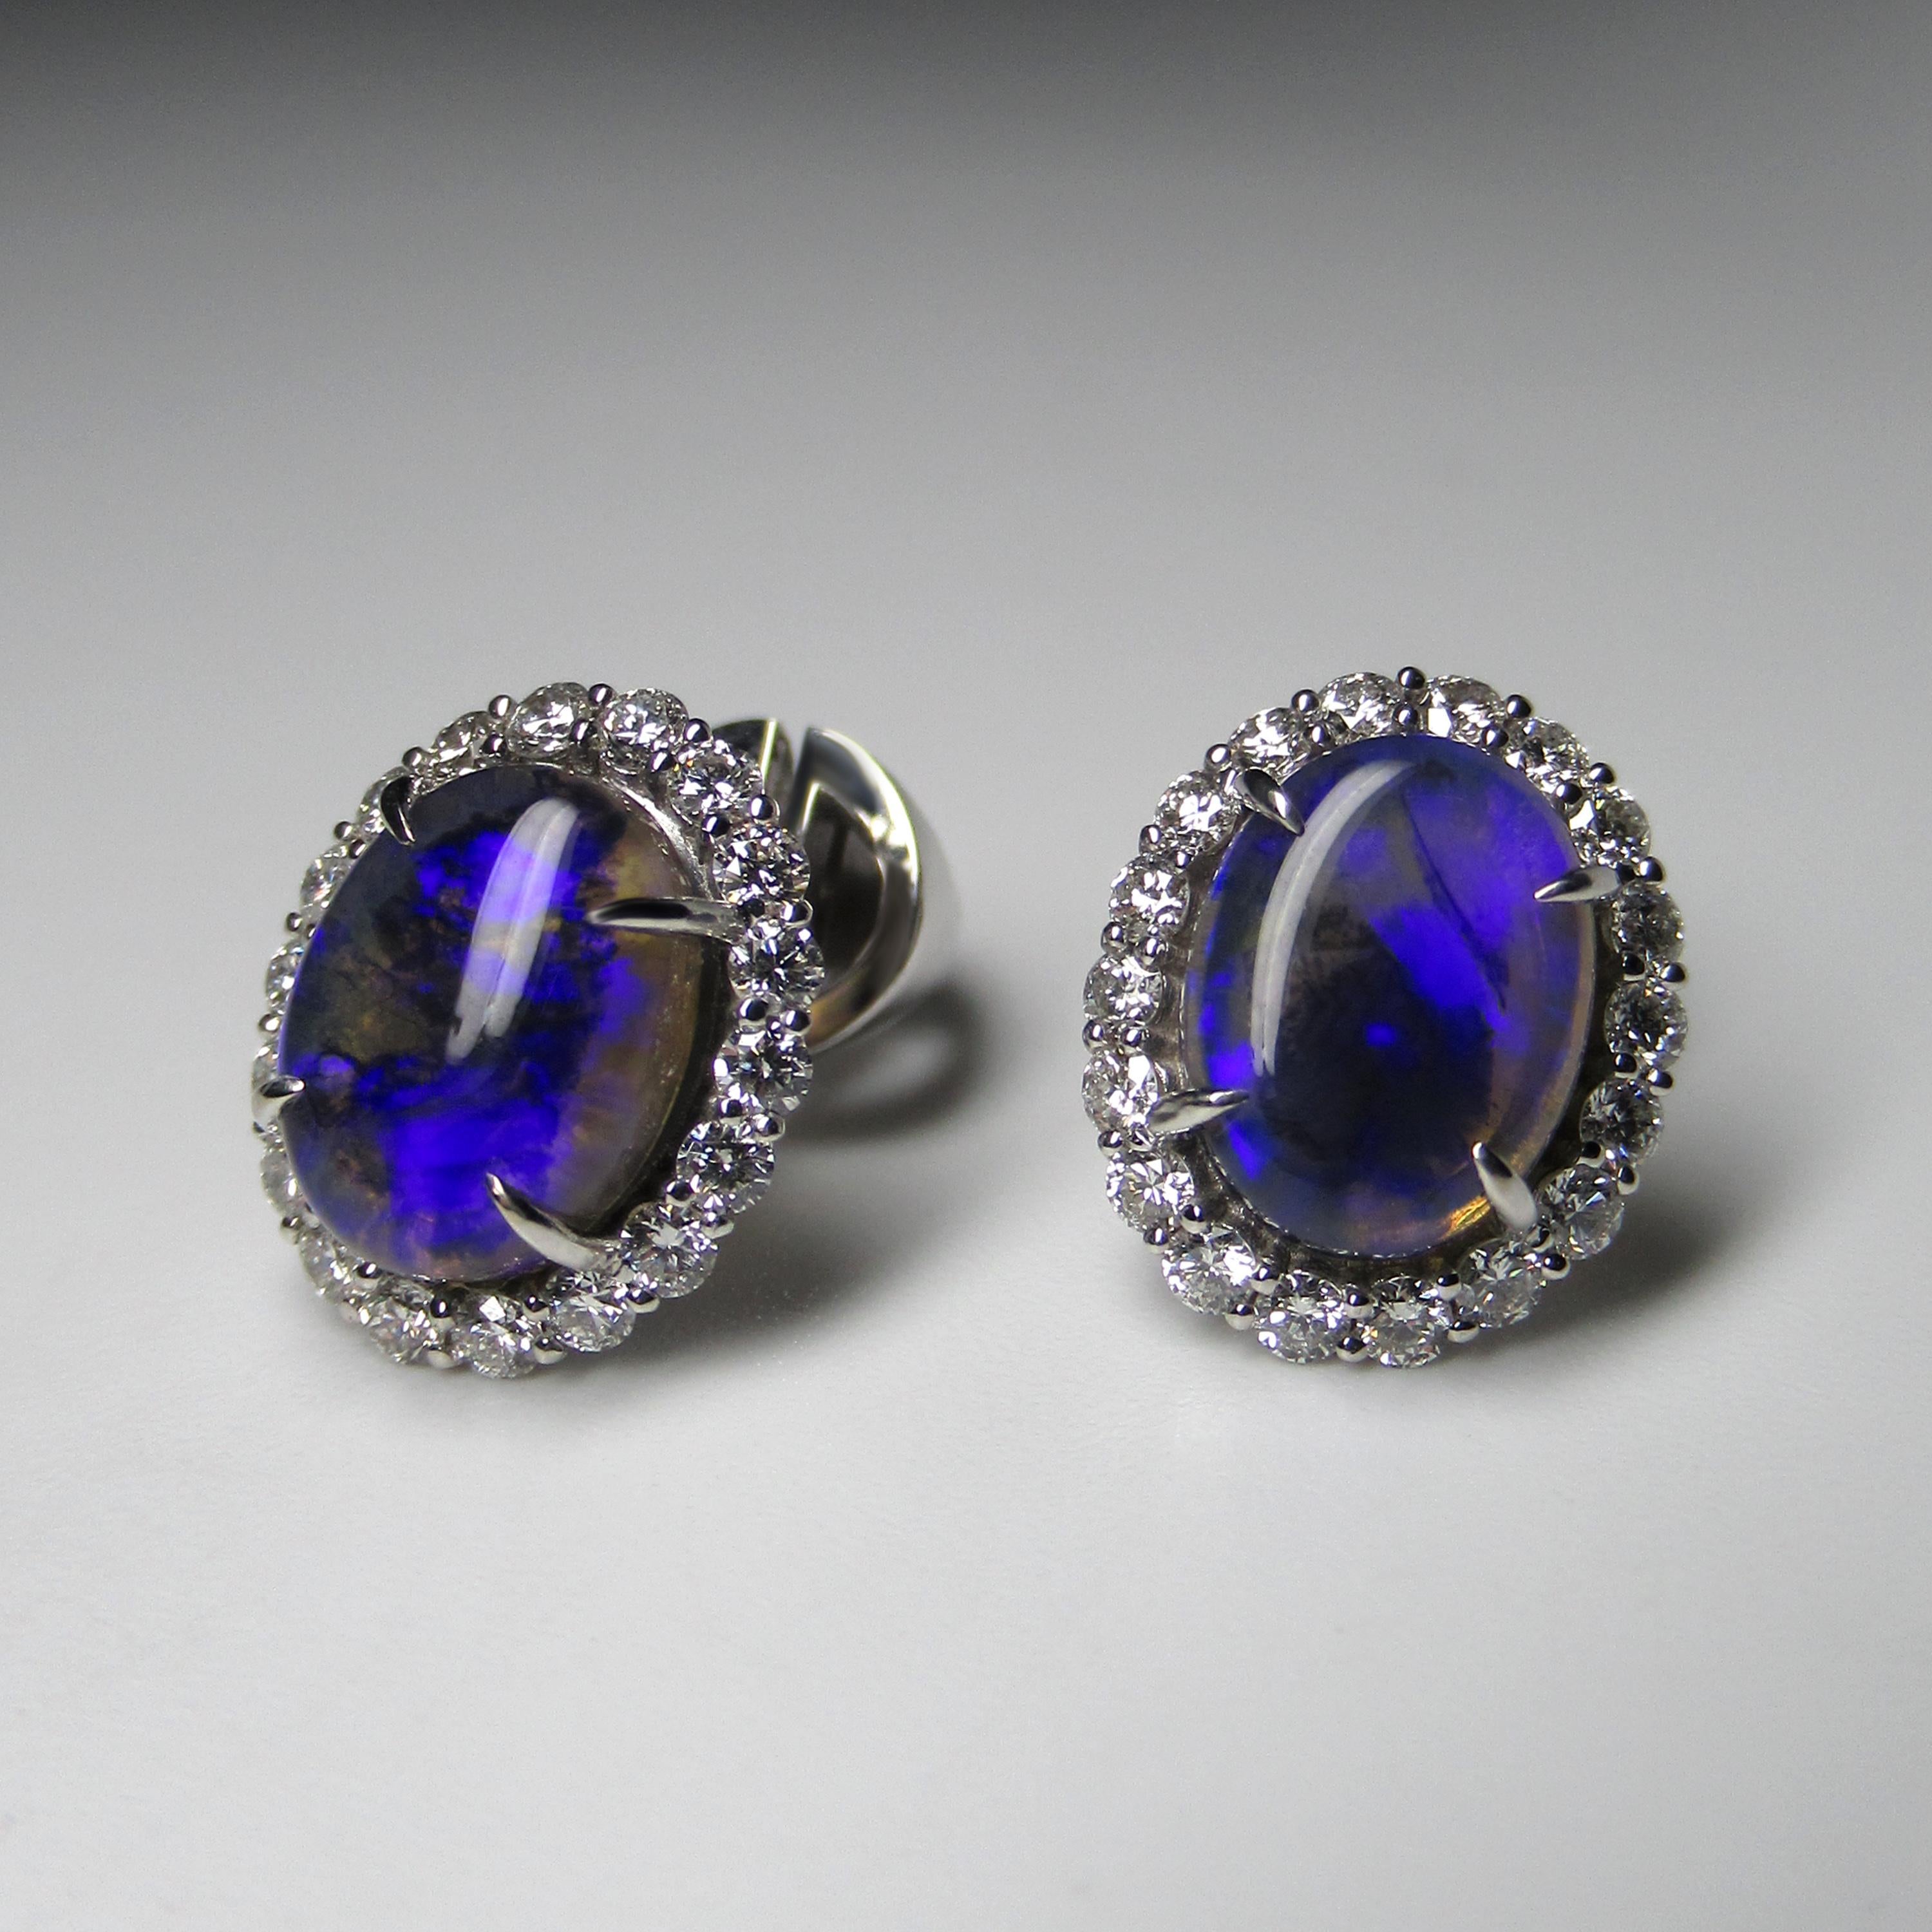 Black Opal 14K white gold earrings 
opal origin - Australia
opal weight - 2.43 carats
earring weight - 4.02 grams
stone measurements - 0.12 x 0.24  x 0.31 in / 3 x 6 x 8 mm


We ship our jewelry worldwide – for our customers it is free of charge and